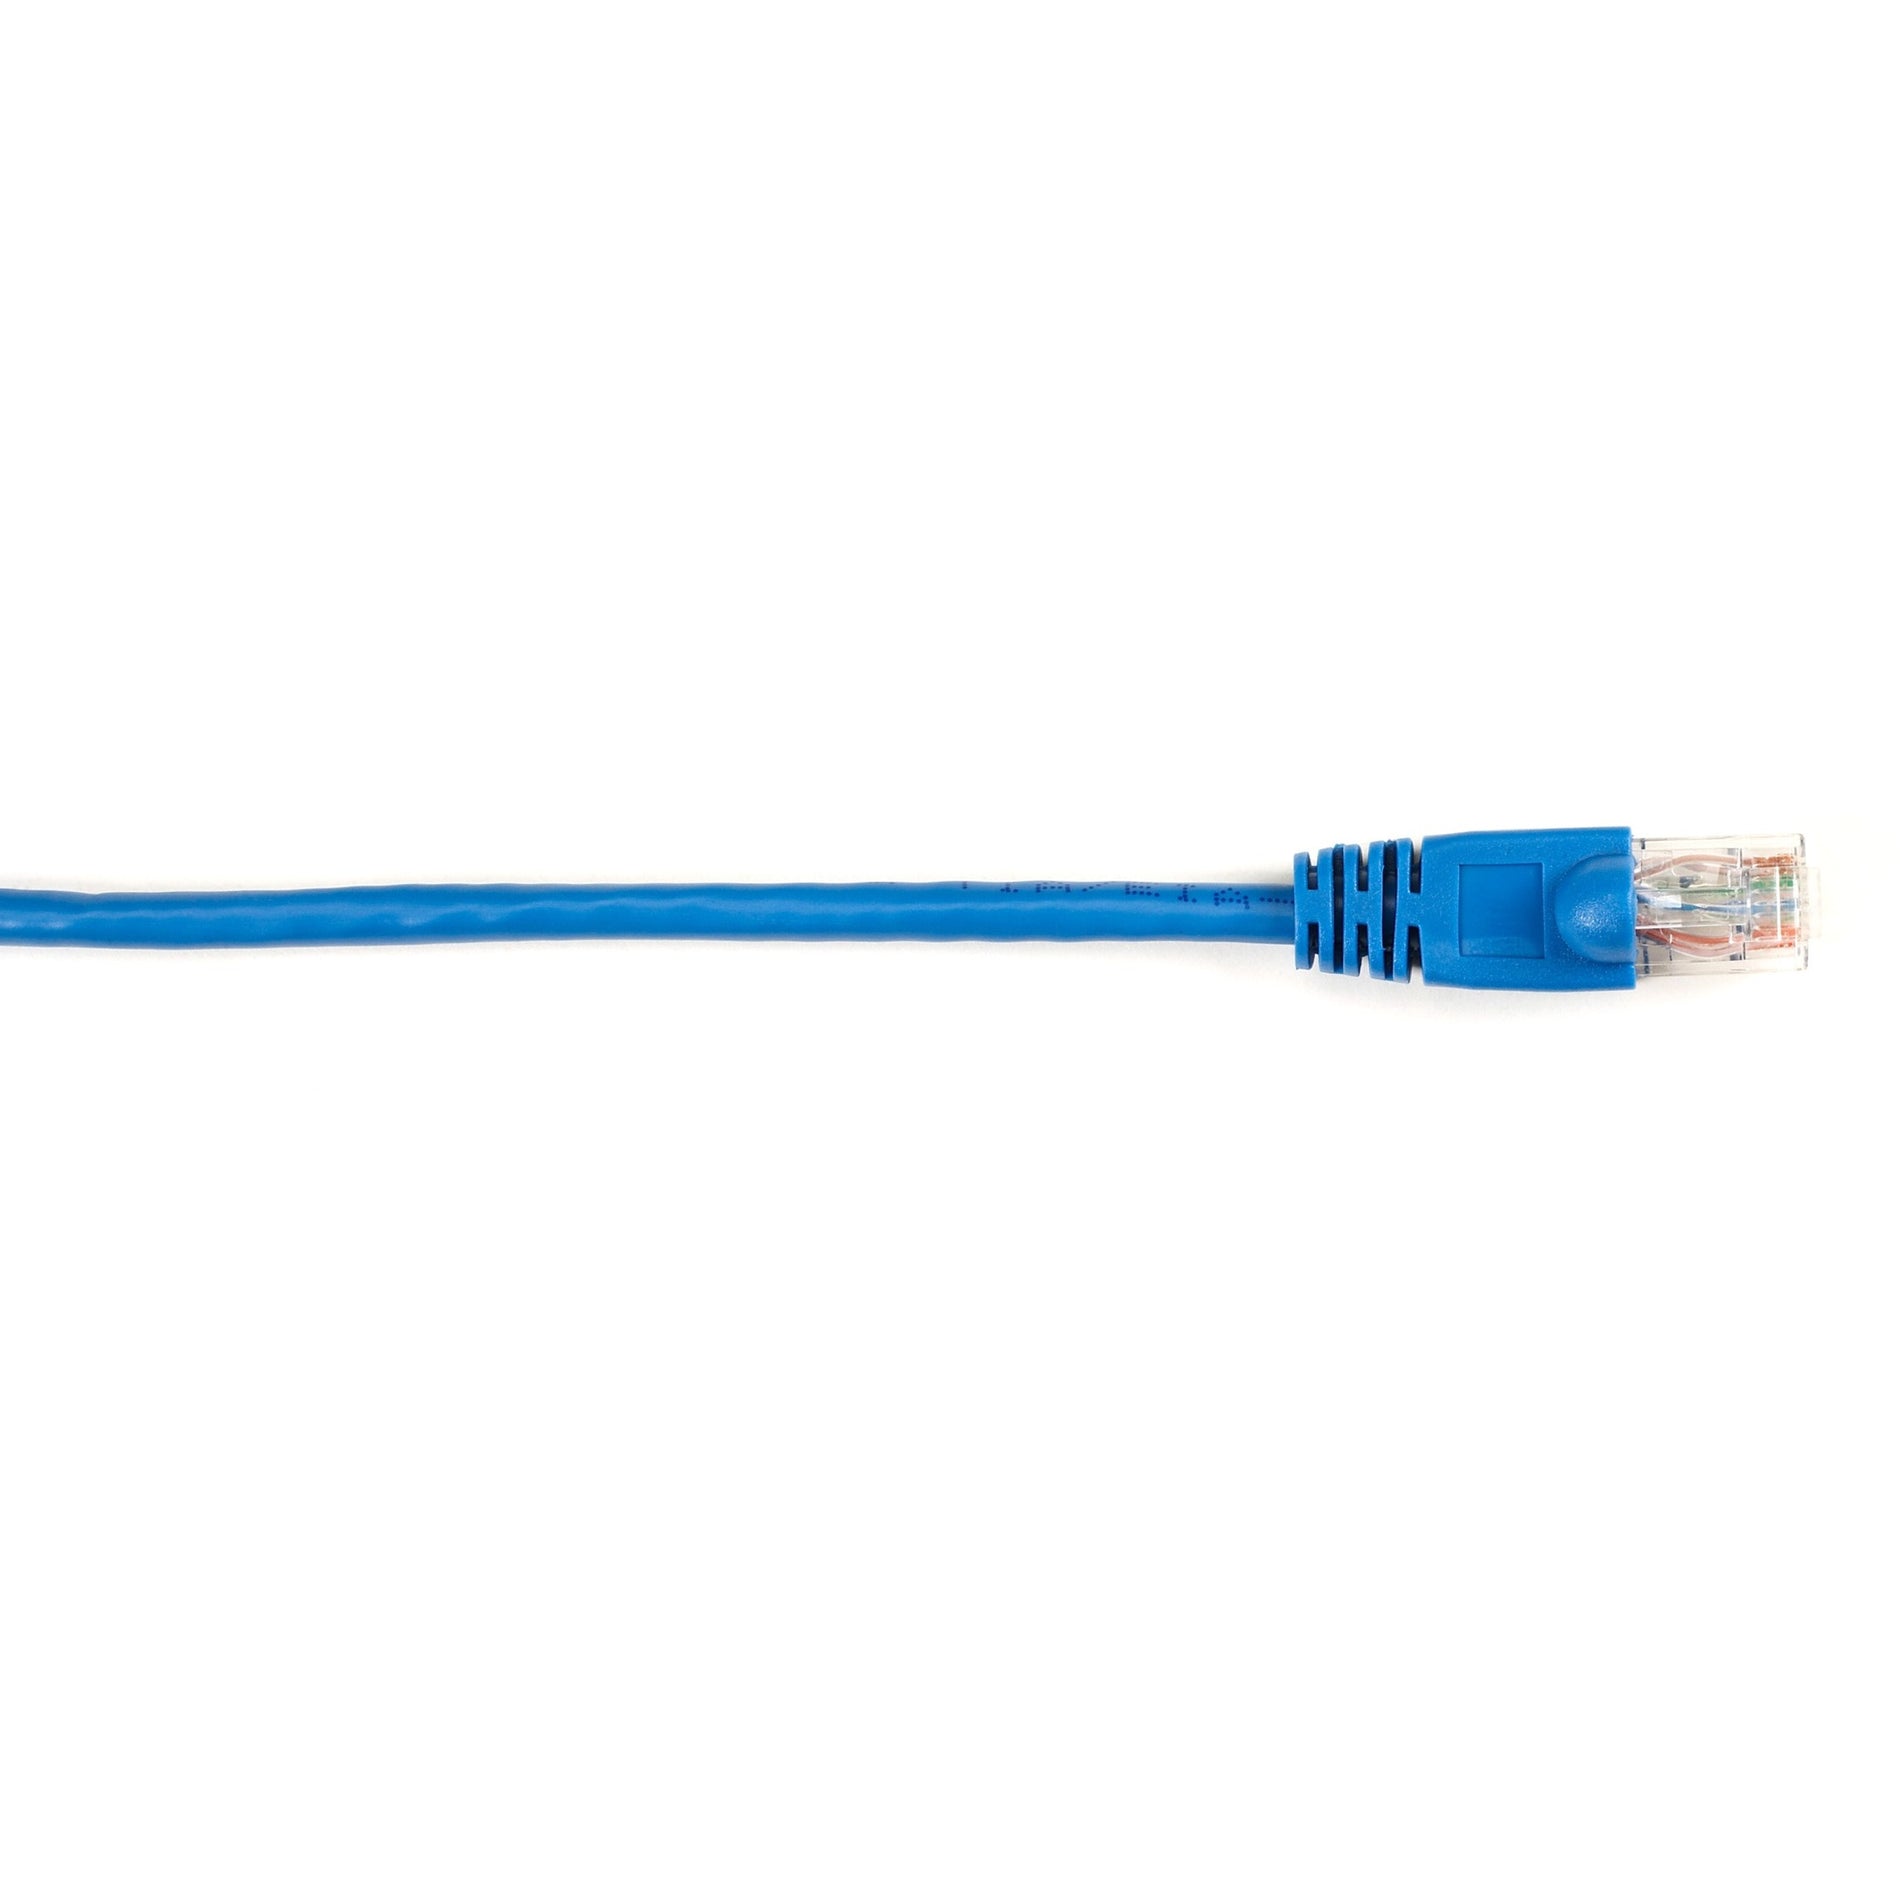 Black Box CAT6PC-010-BL Connect Cat.6 UTP Patch Network Cable, 10 ft, Blue, 1 Gbit/s Data Transfer Rate